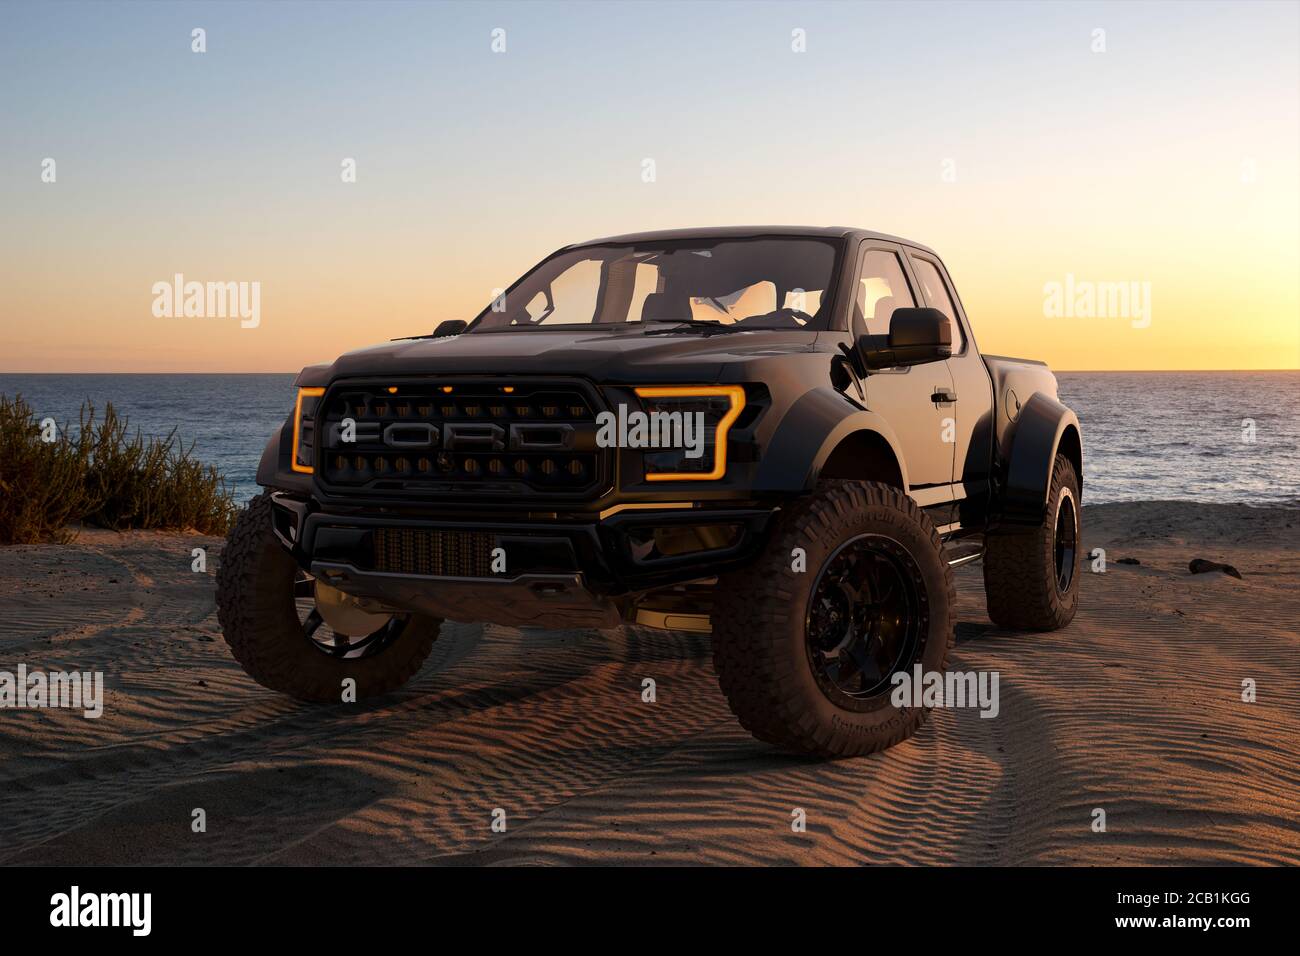 Ford F-150 Raptor - Most Extreme Production Truck On The Planet standing on a sand dune by the ocean Stock Photo